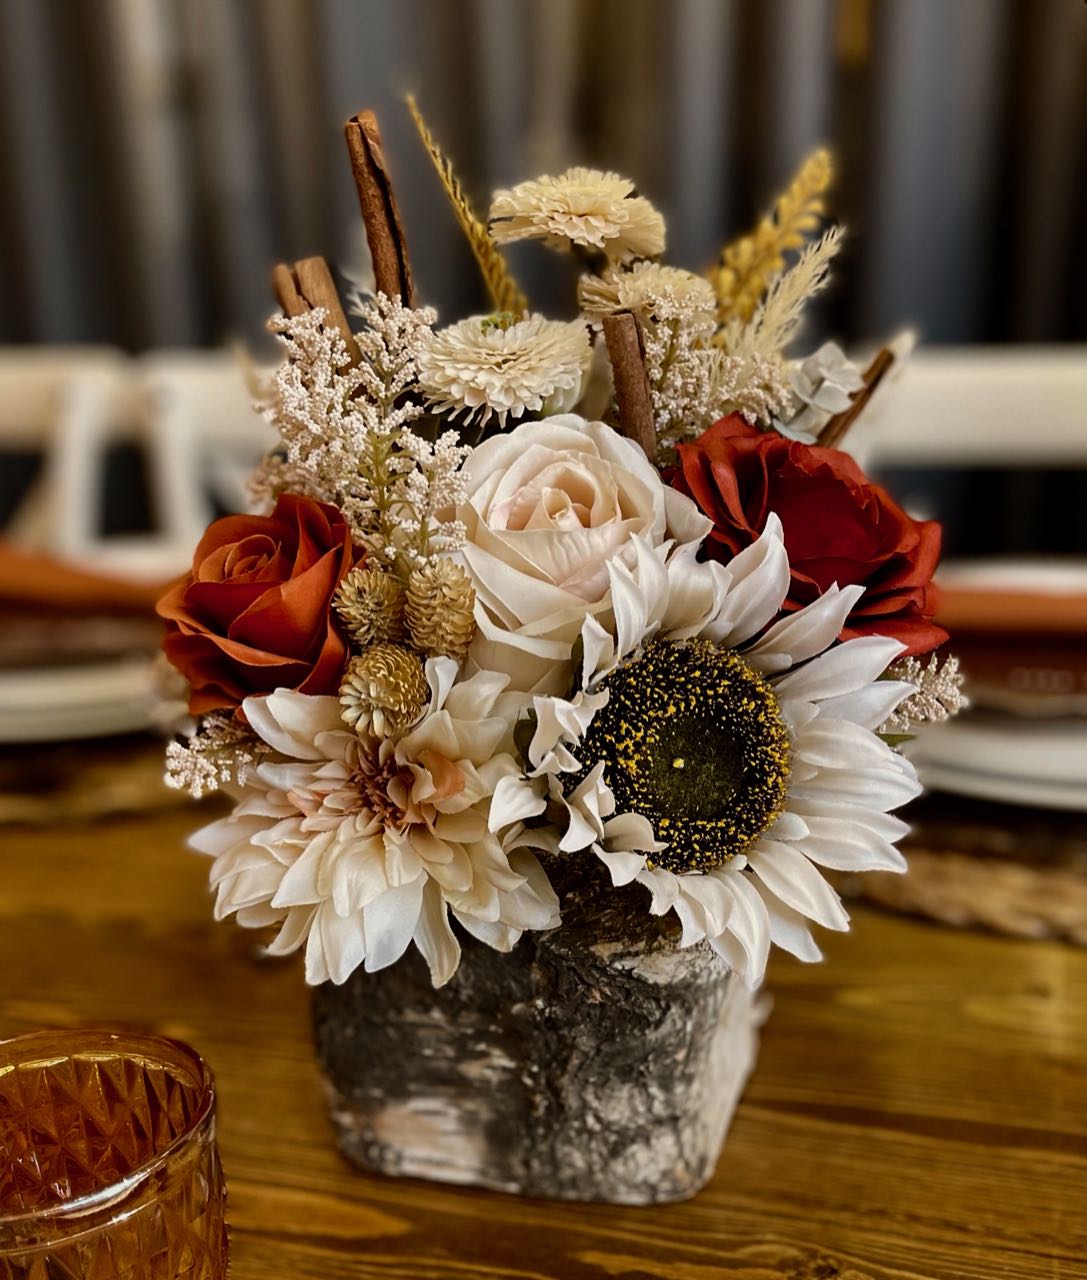 This centrepiece features rust and cream roses combined with pampas, eucalyptus, and for a fun twist, cinnamon sticks, all nestled in a birch vase. The centrepiece is approx 8 inches wide by 12 inches tall. This earthy concoction would not look out of place on a cocktail table,  however it has enough presence and height to be used on a 8 foot round tale surrounded by candle votives.